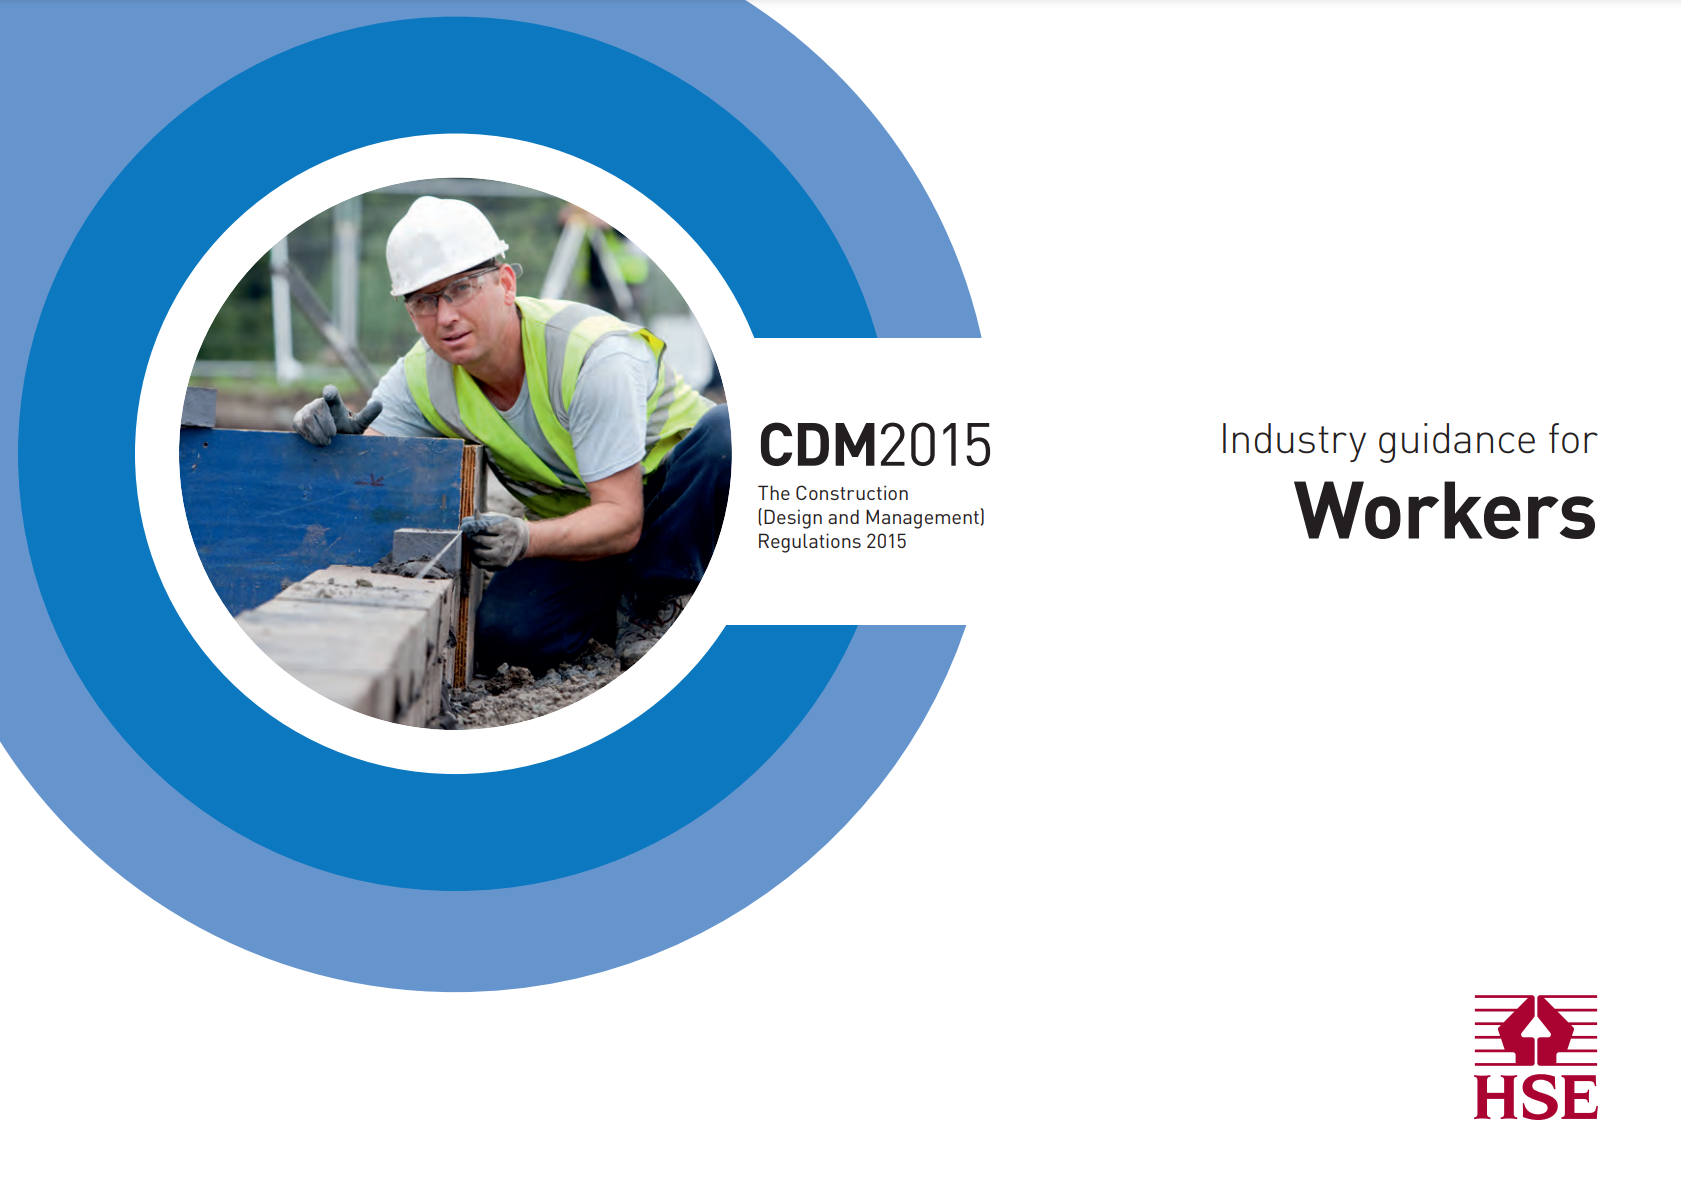 CDM2015-Industry guidance for Workers